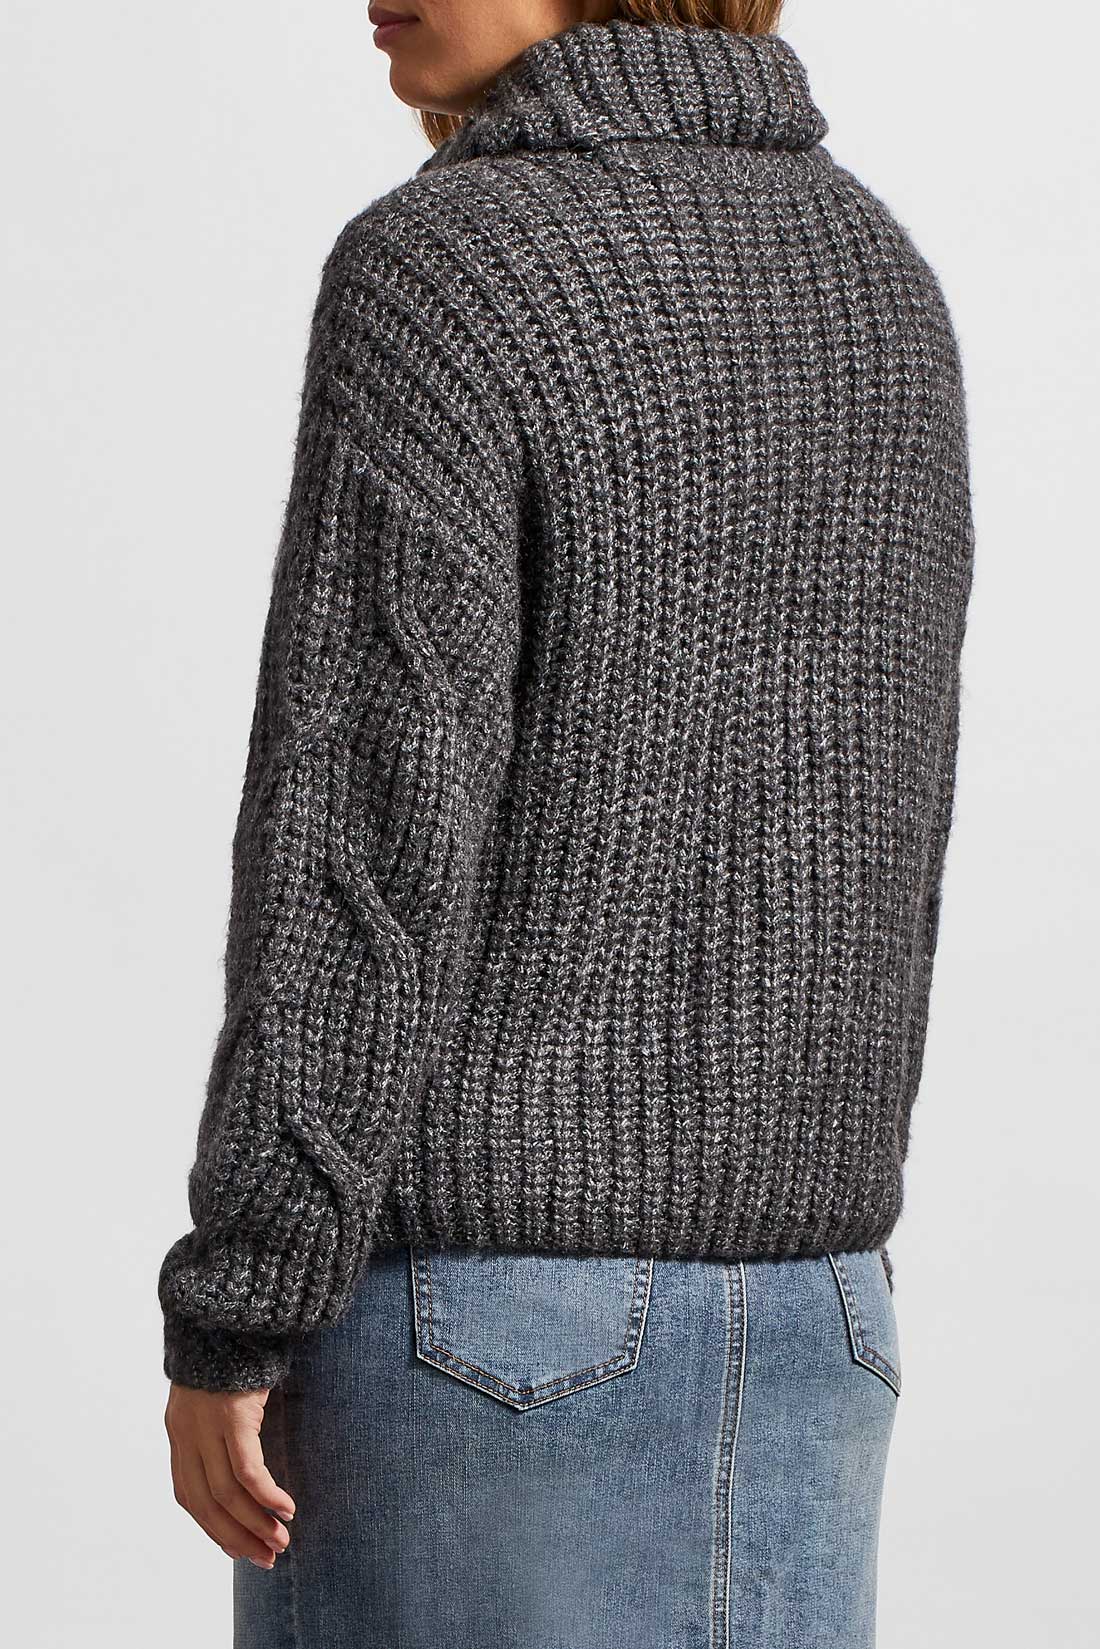 T-Neck Cable Sweater Detail